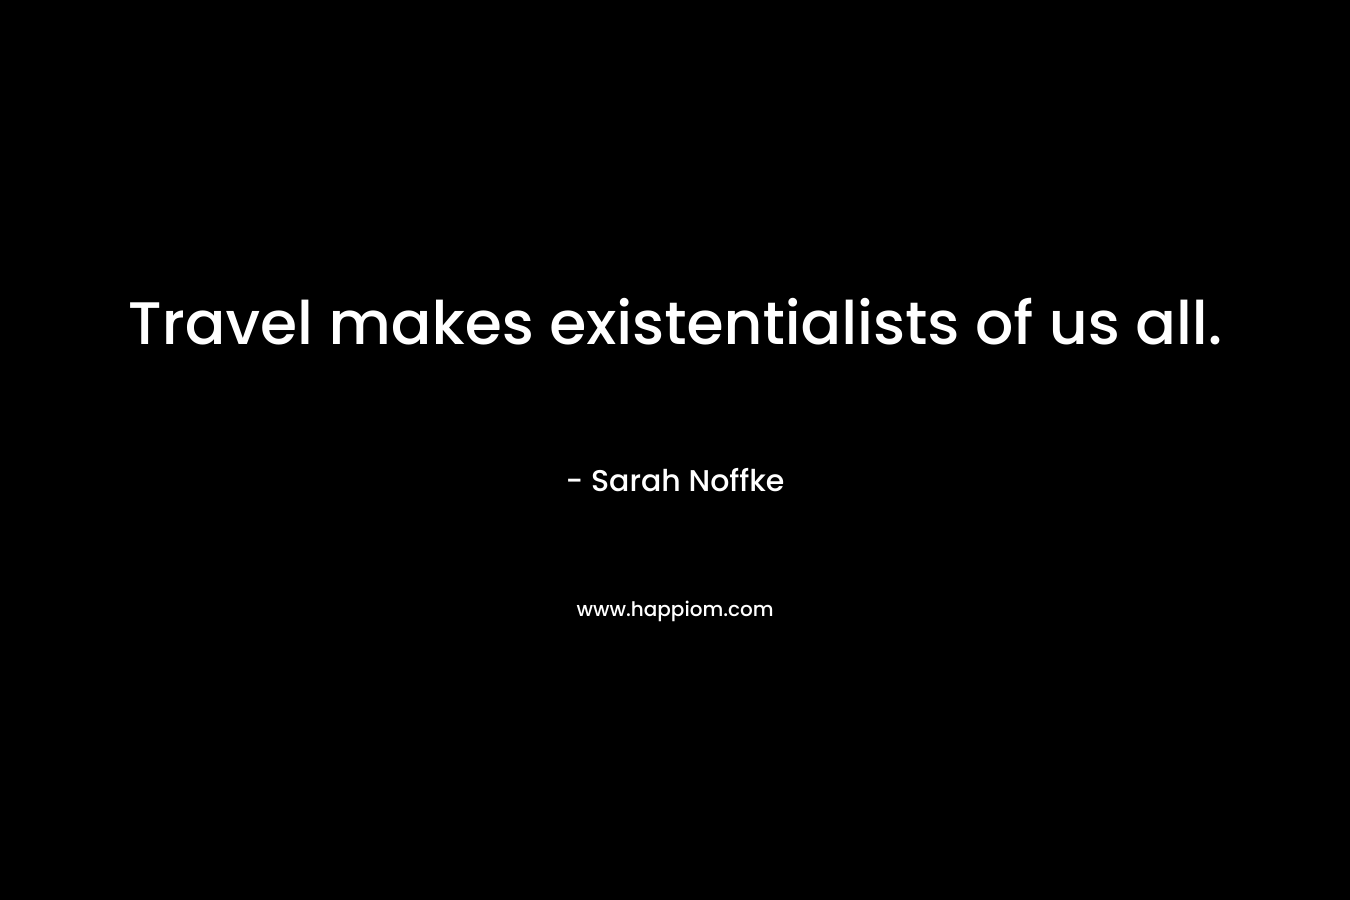 Travel makes existentialists of us all. – Sarah Noffke